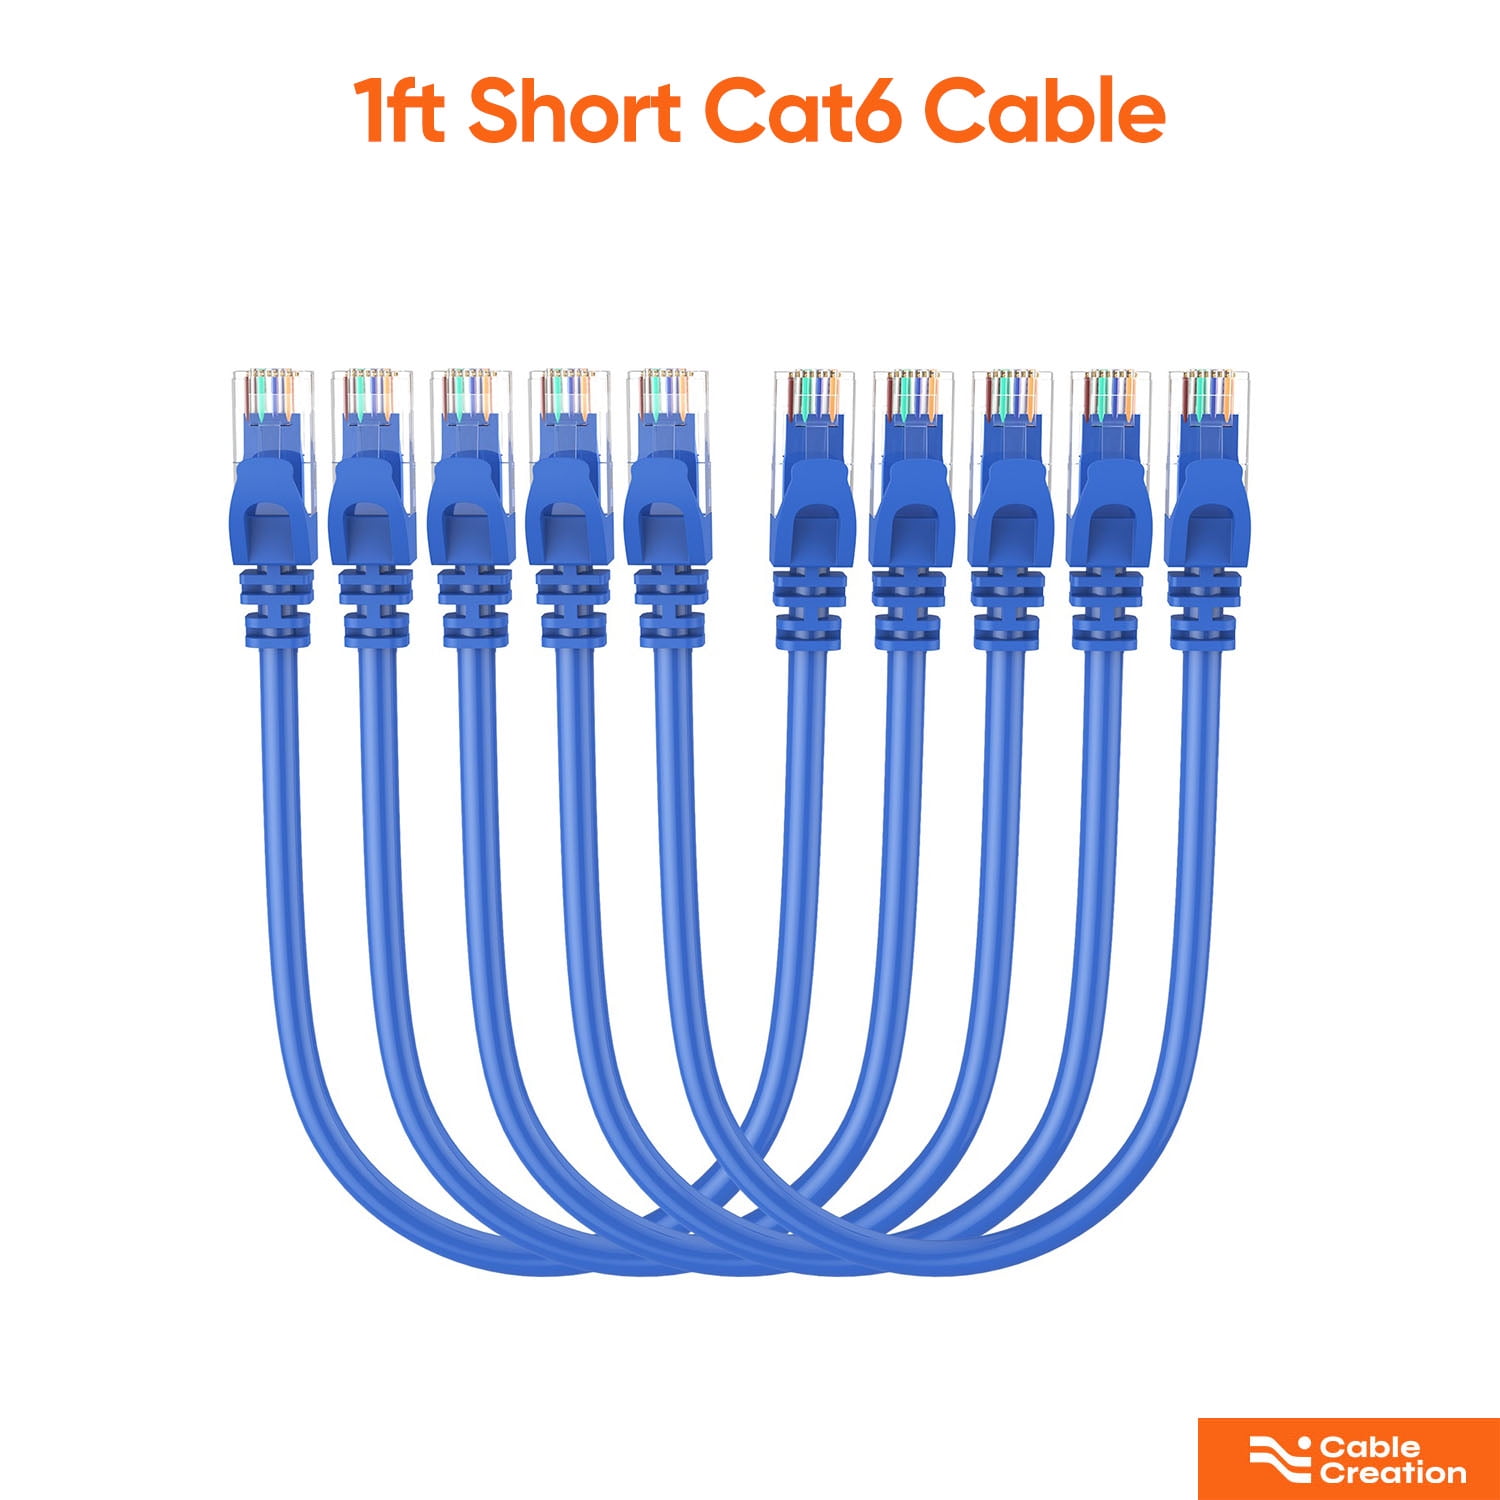 Cat 6 Ethernet Cable 1ft (6 Pack) (at a Cat5e Price but Higher Bandwidth)  Flat Internet Network Cable - Cat6 Ethernet Patch Cable Short - White Cat6